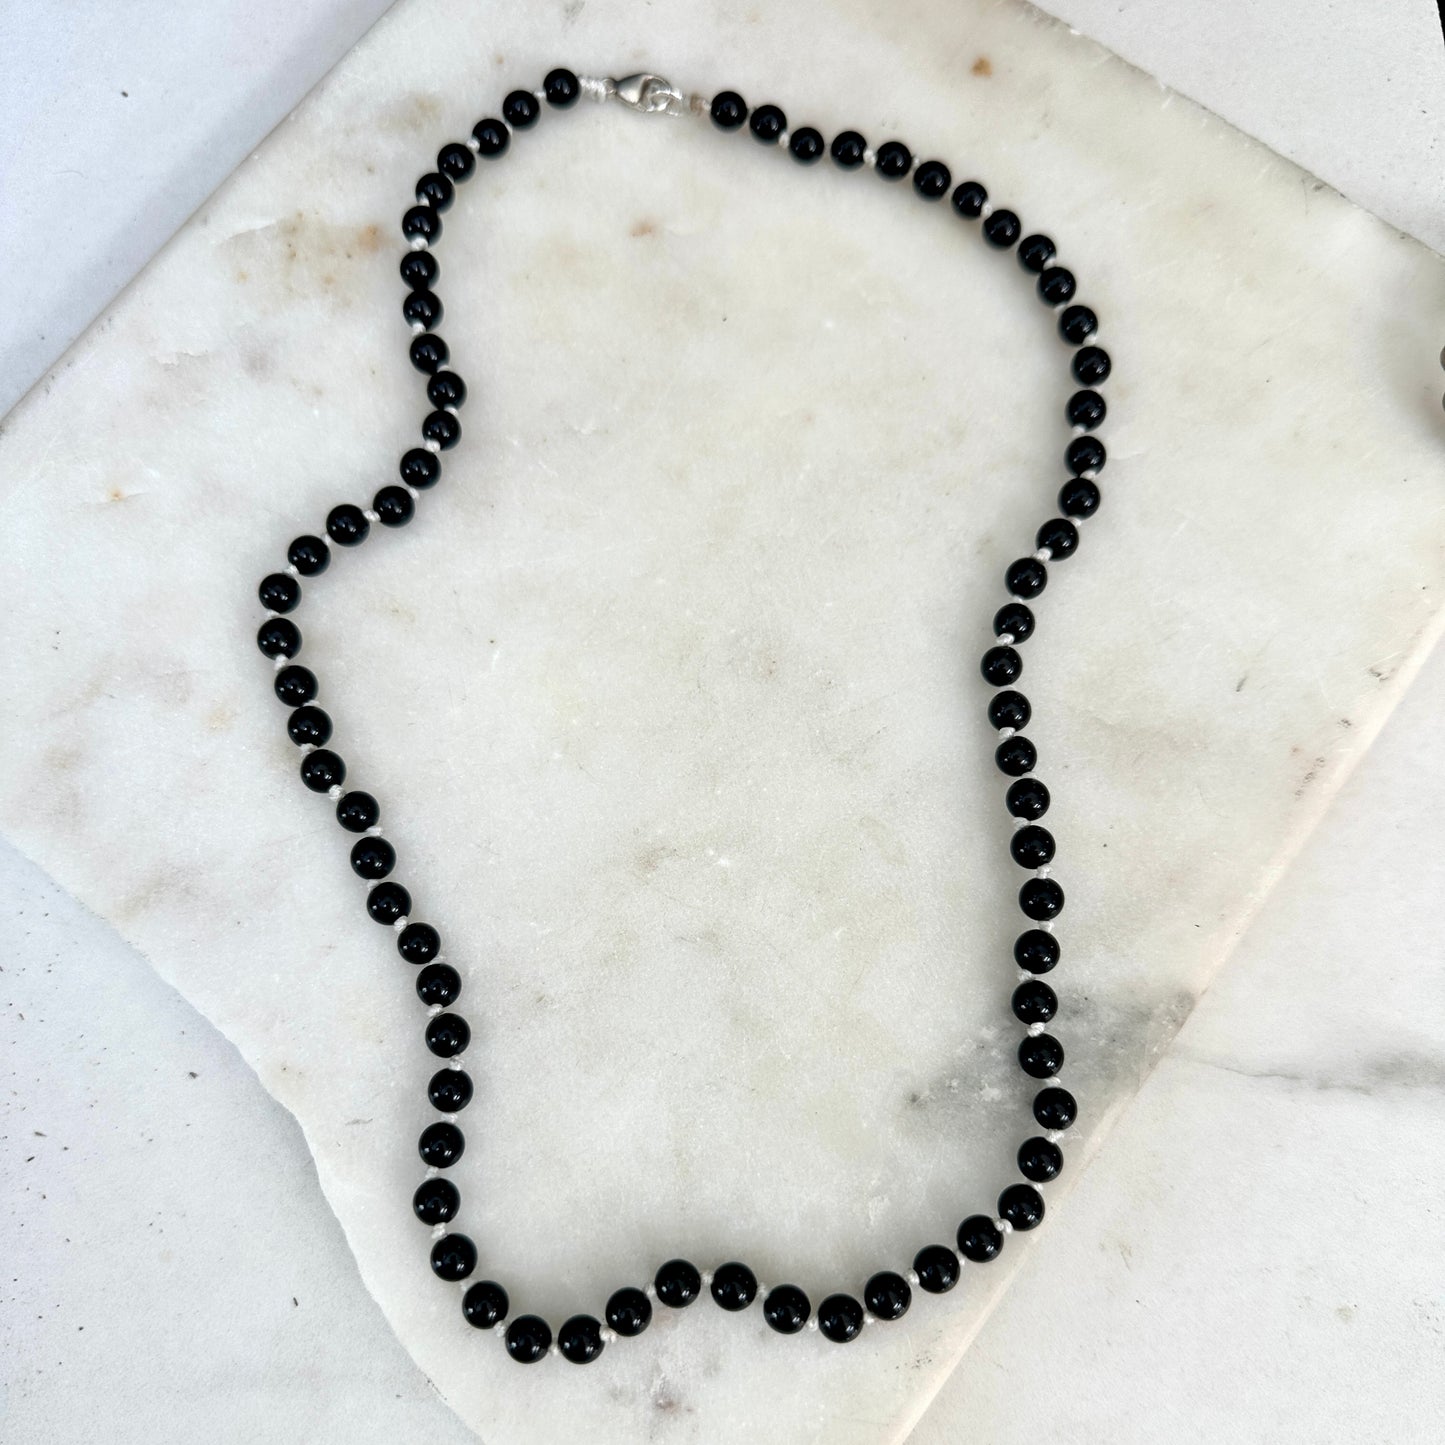 Obsidian Knotted Convertible Necklace/Bracelet